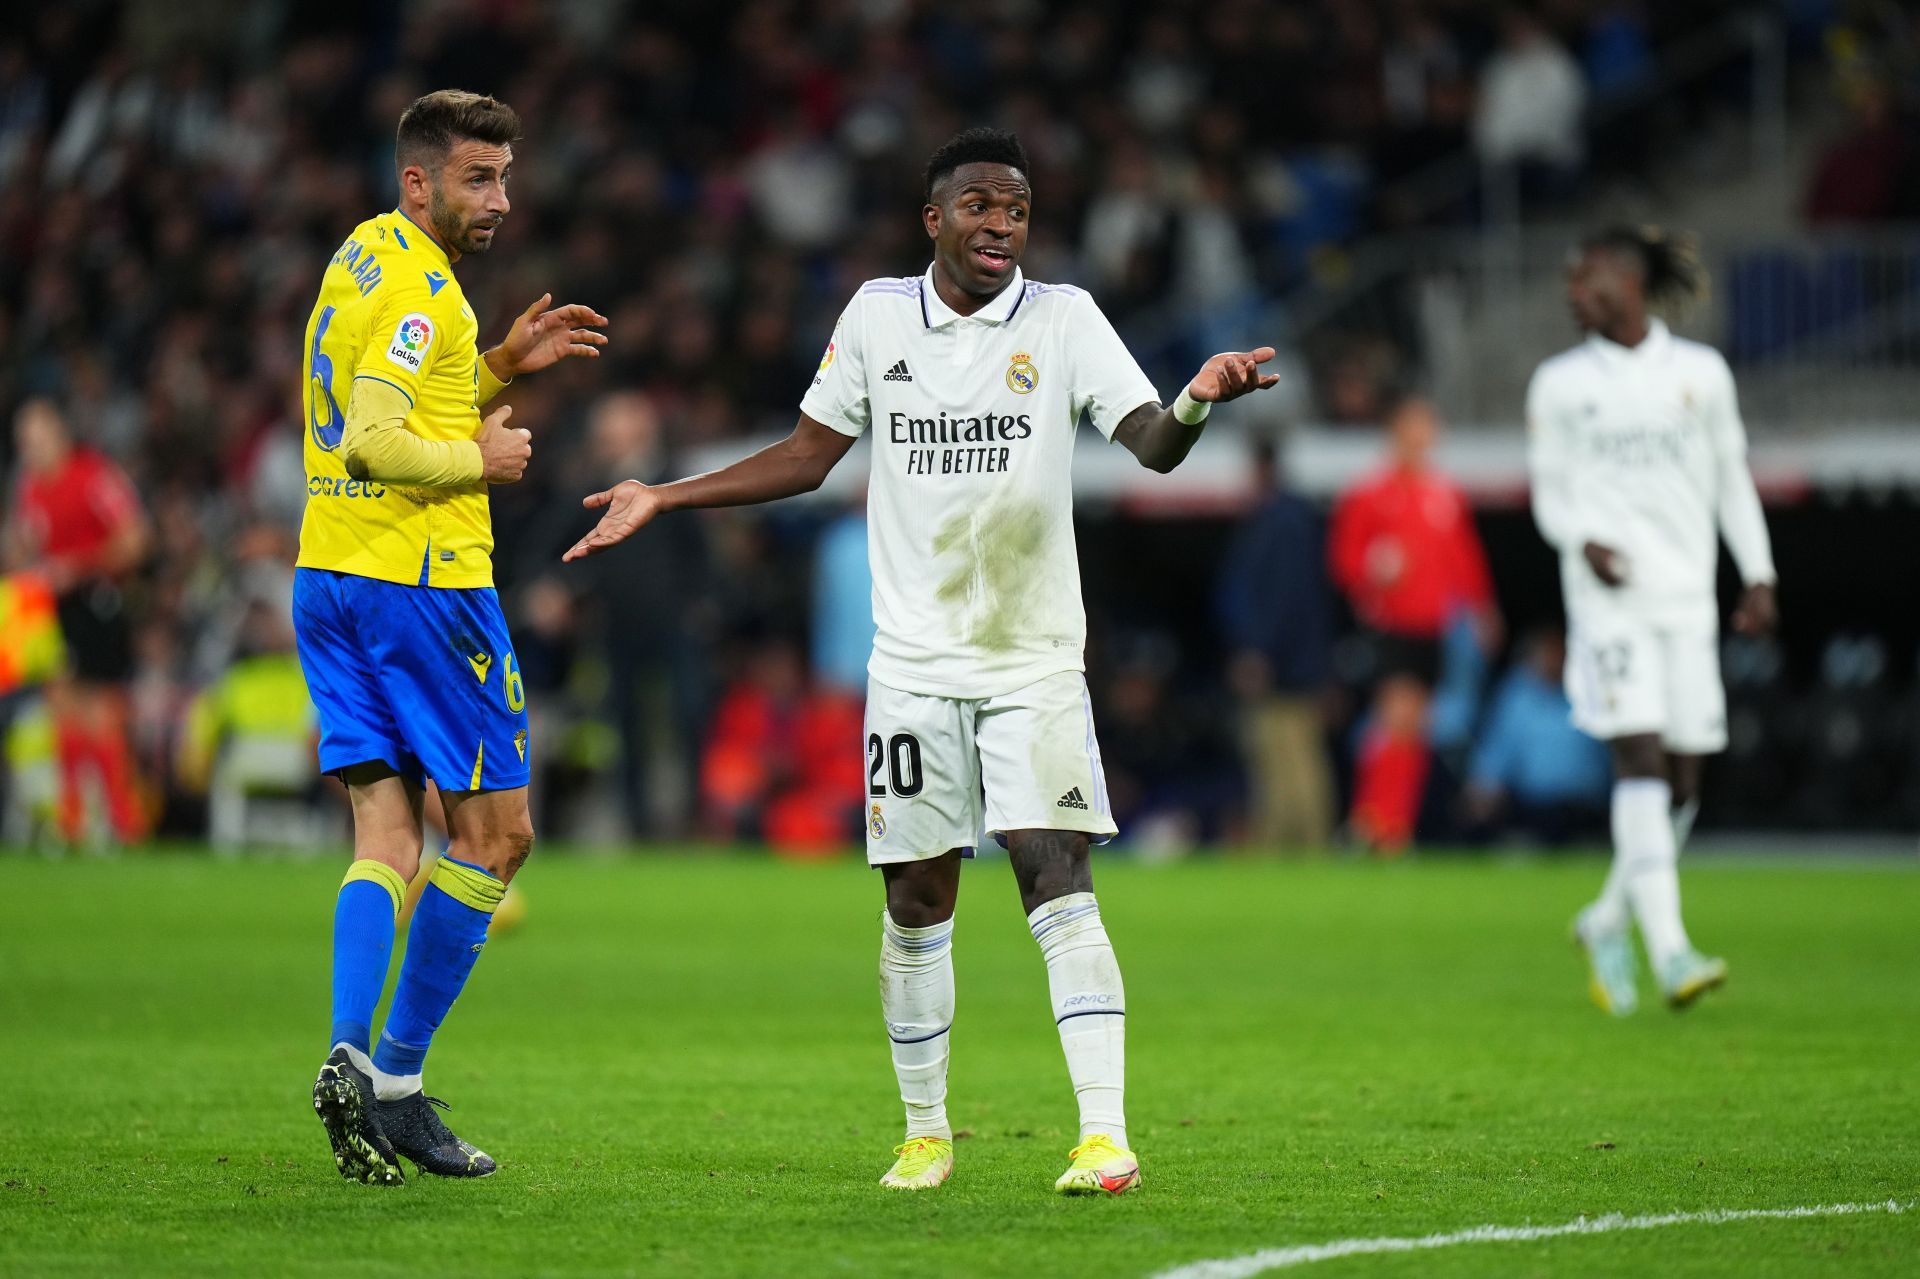 Vinicius Junior has received recent criticism for his attitude on the pitch during games.